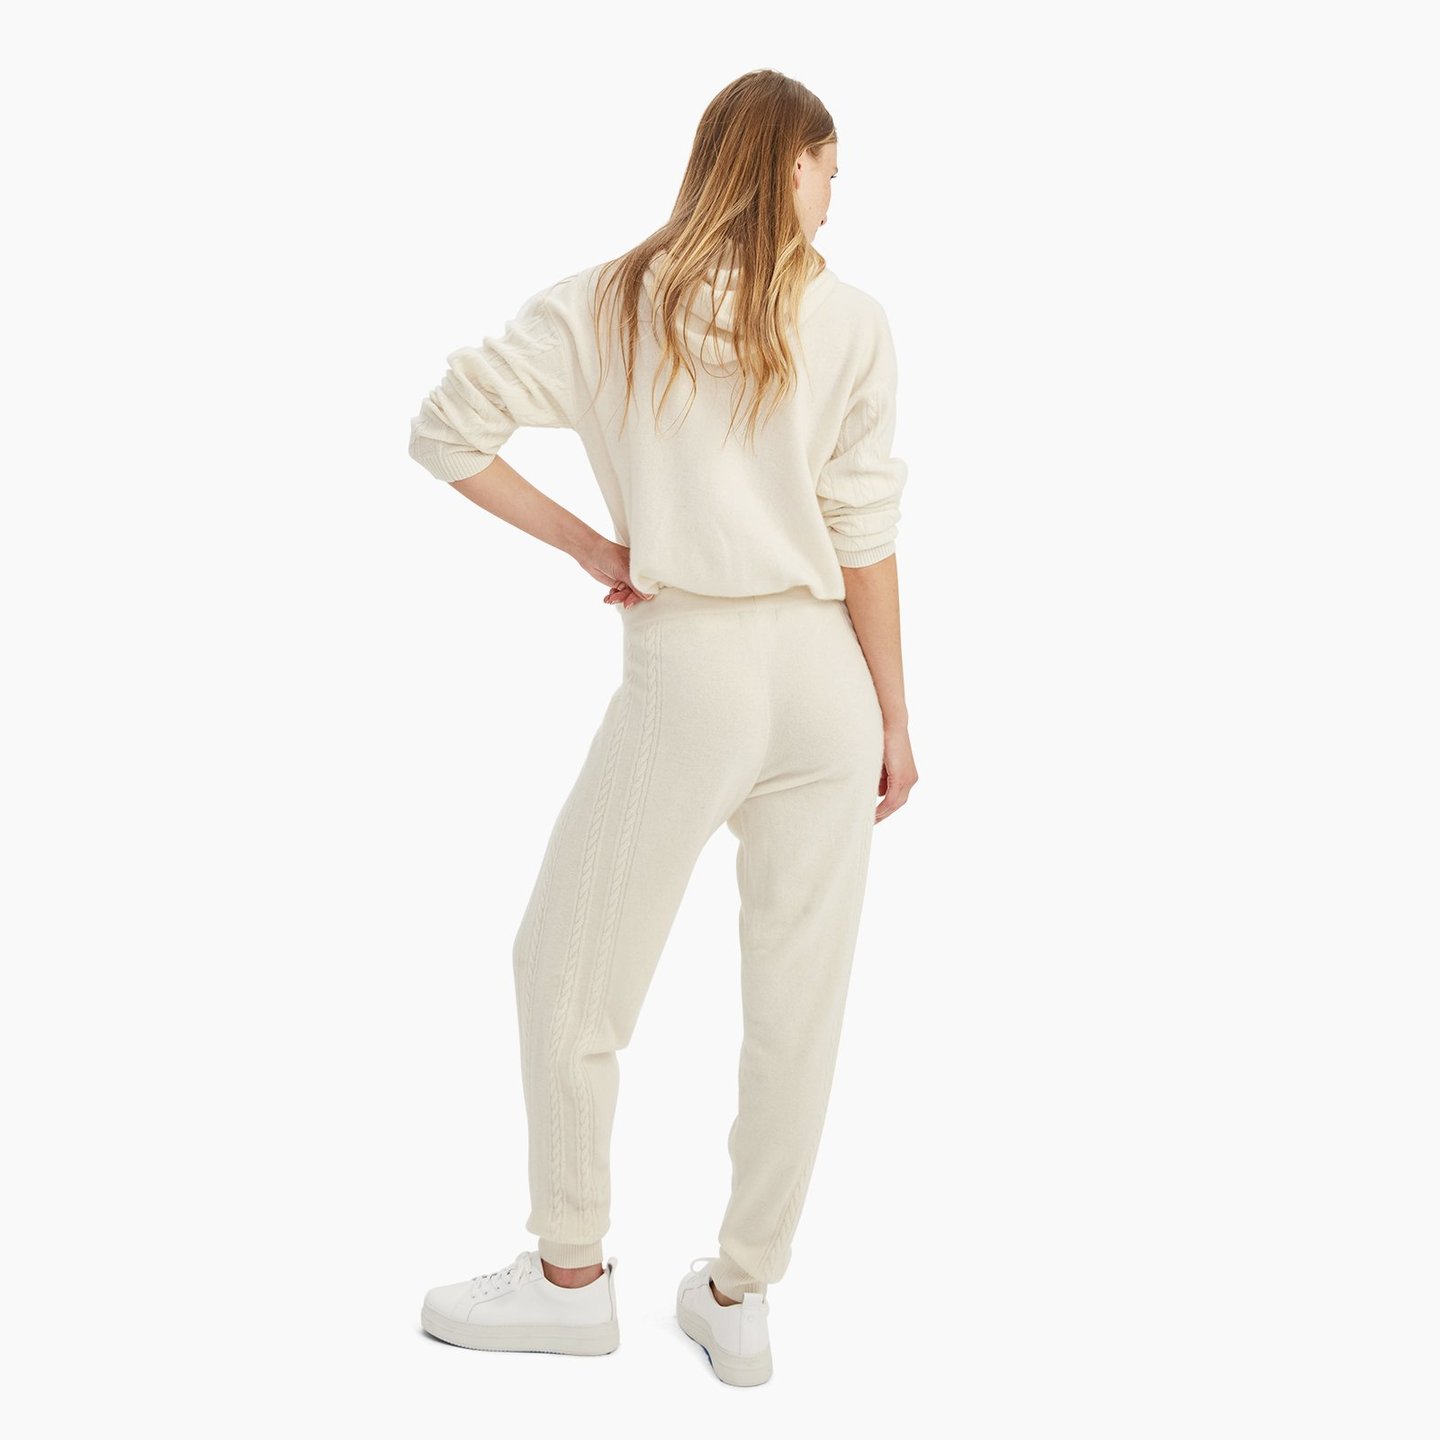 NWEB000842_Cashmere_Cable_Jogger_White_015_1440x.jpg